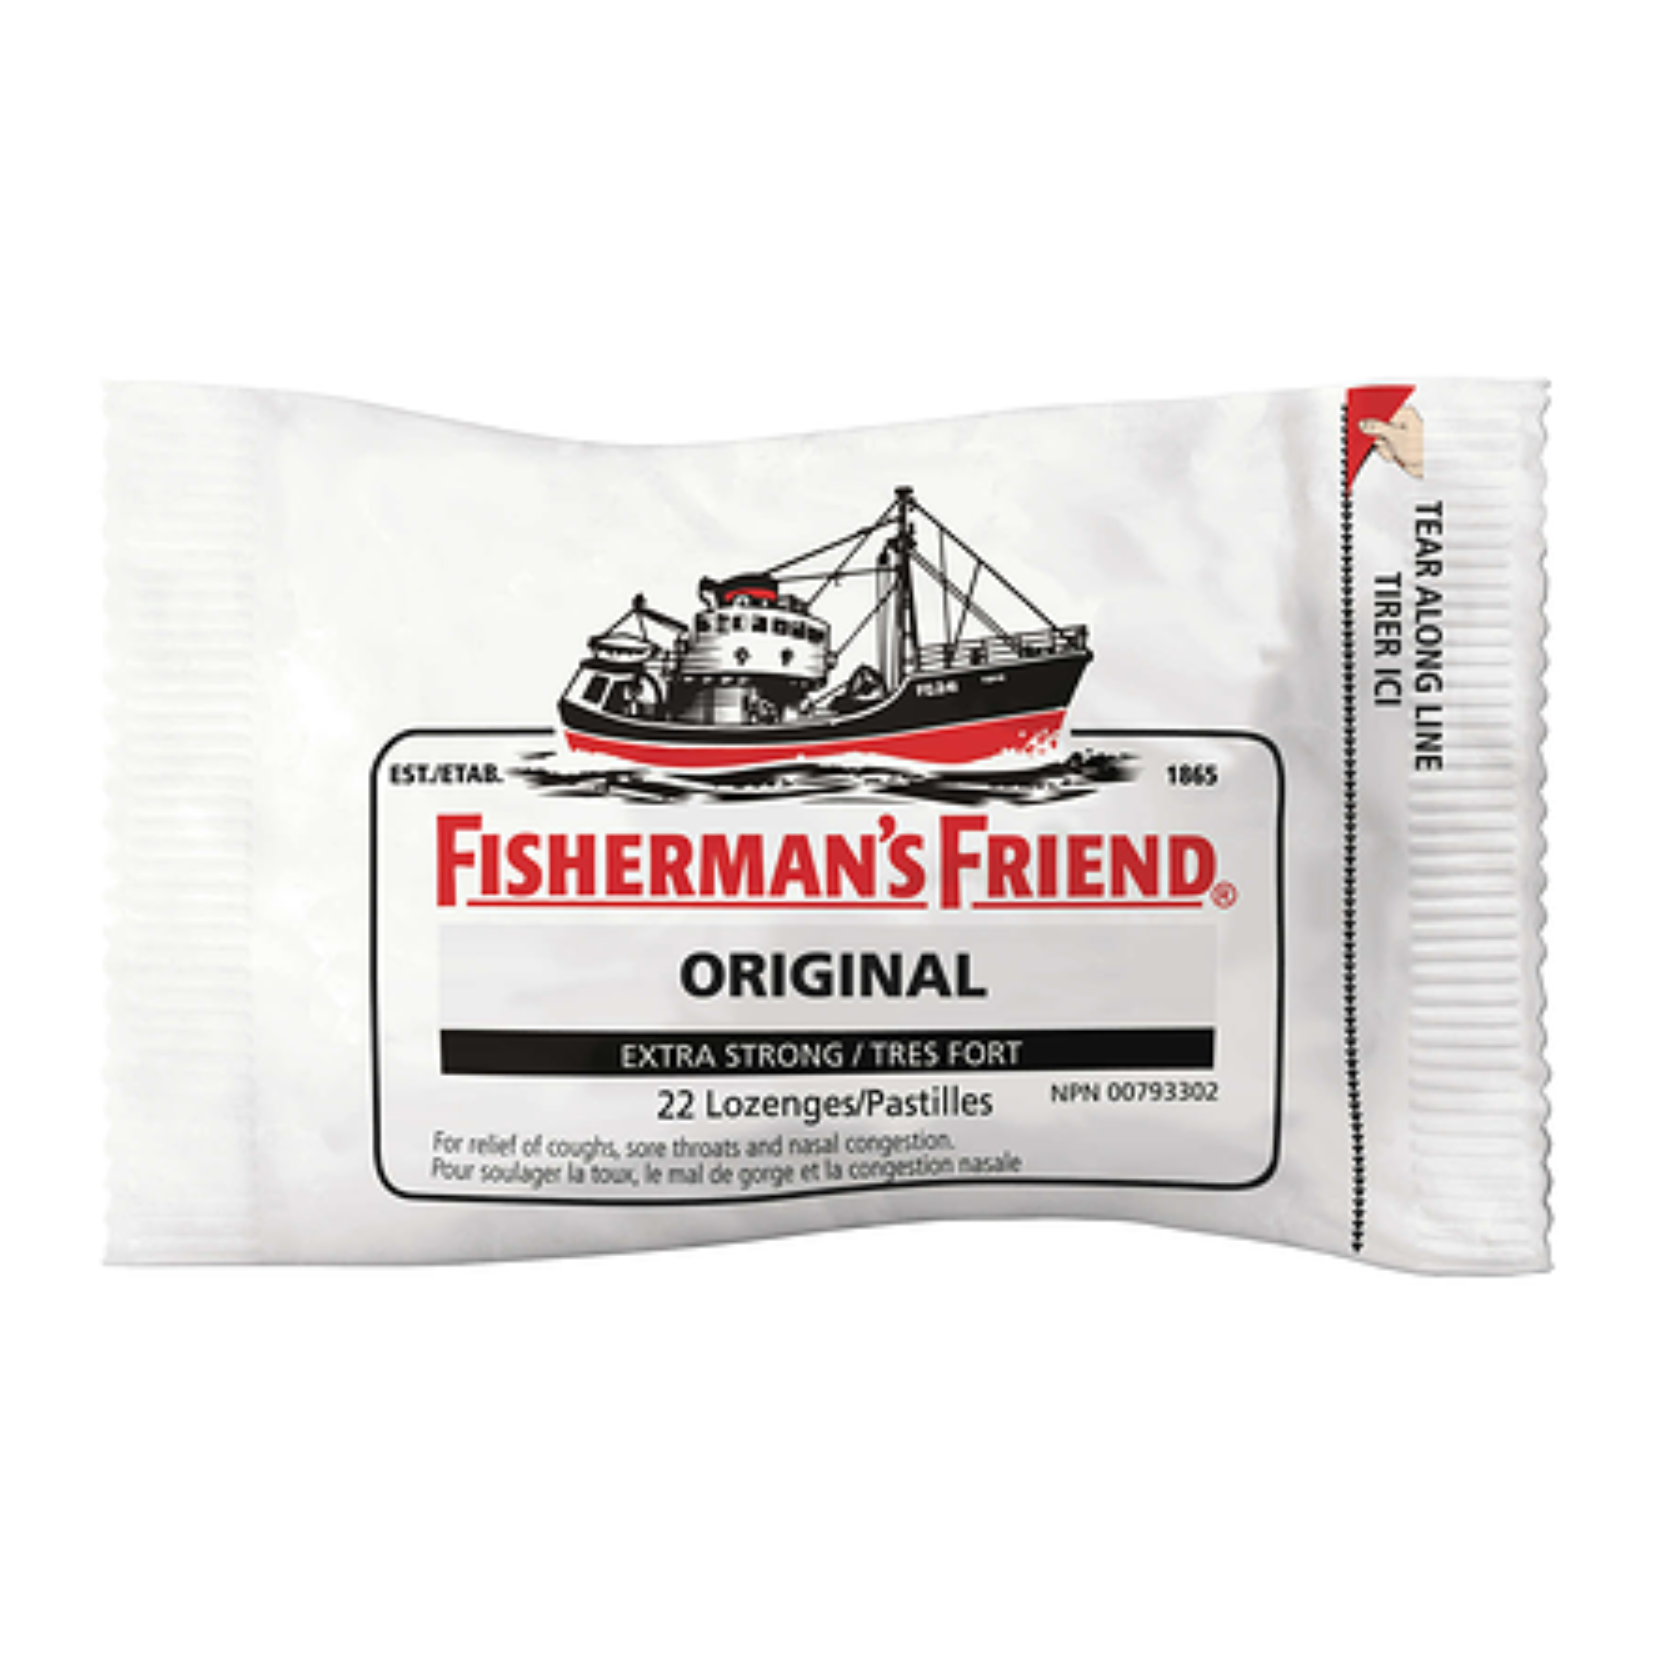 Fisherman's Friend Original Extra Strong Lozenges 22ct